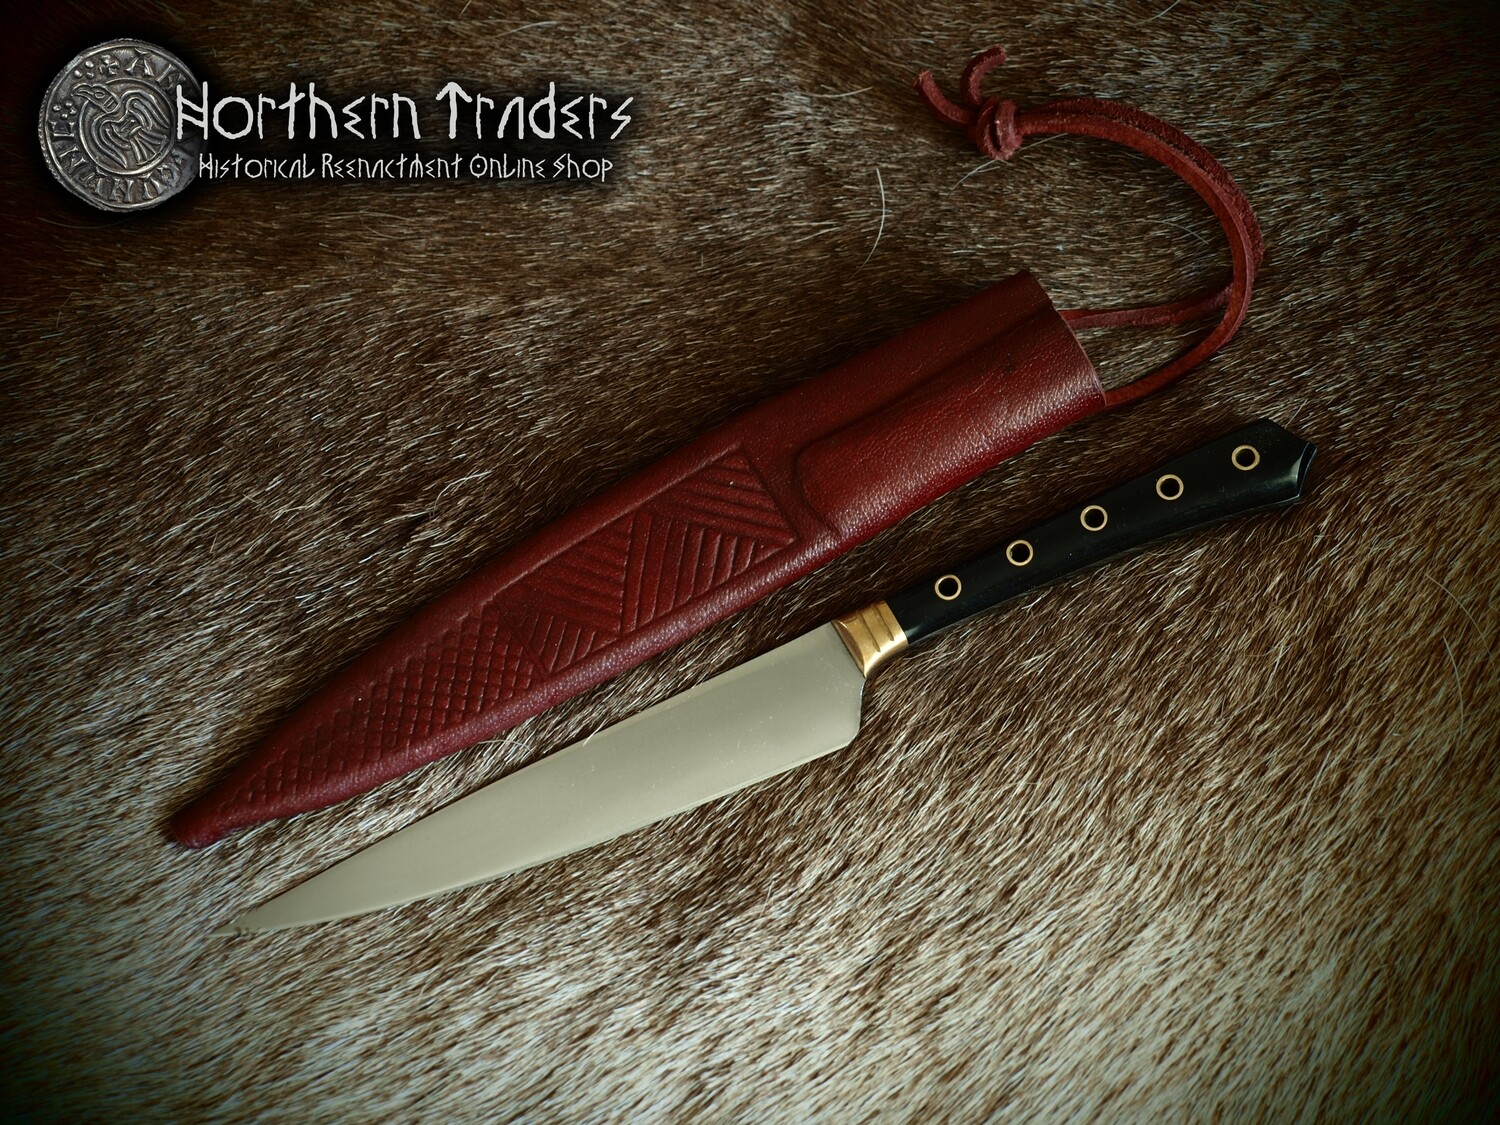 Medieval Knife - Deluxe Version with Decorated Sheath